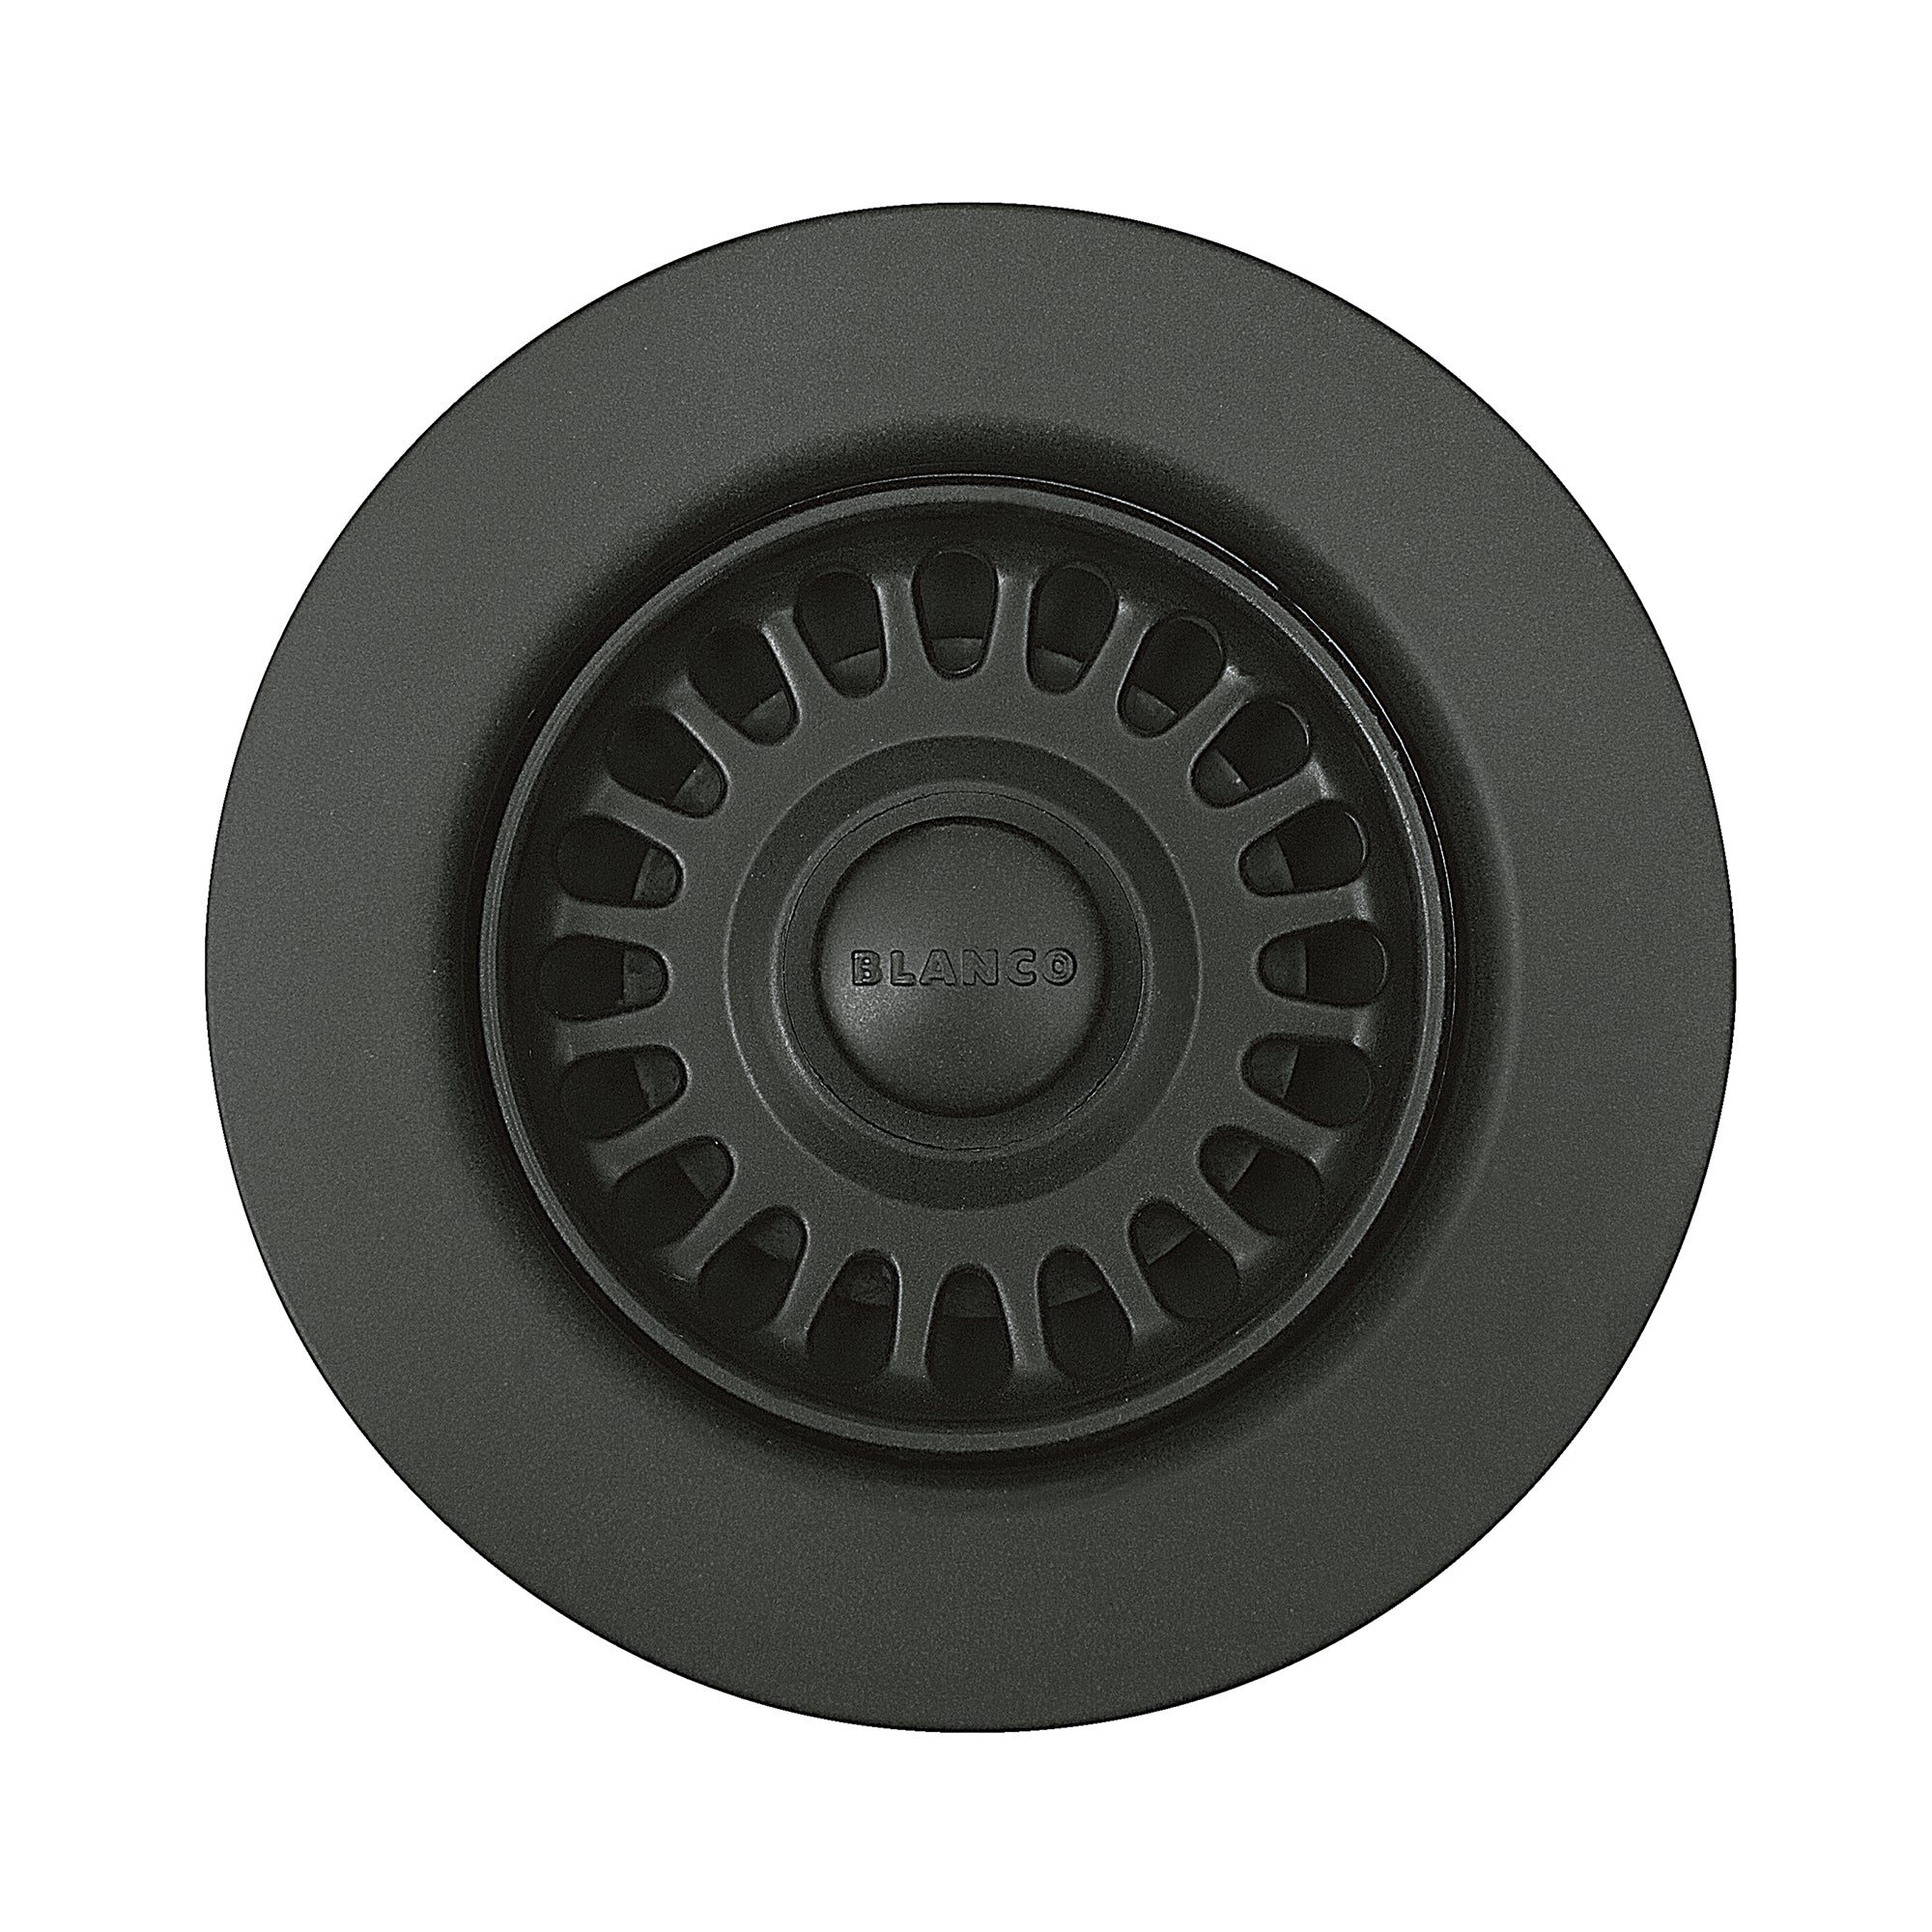 Blanco 240333- Colour-coordinated Metal Waste Flange, Anthracite - FaucetExpress.ca